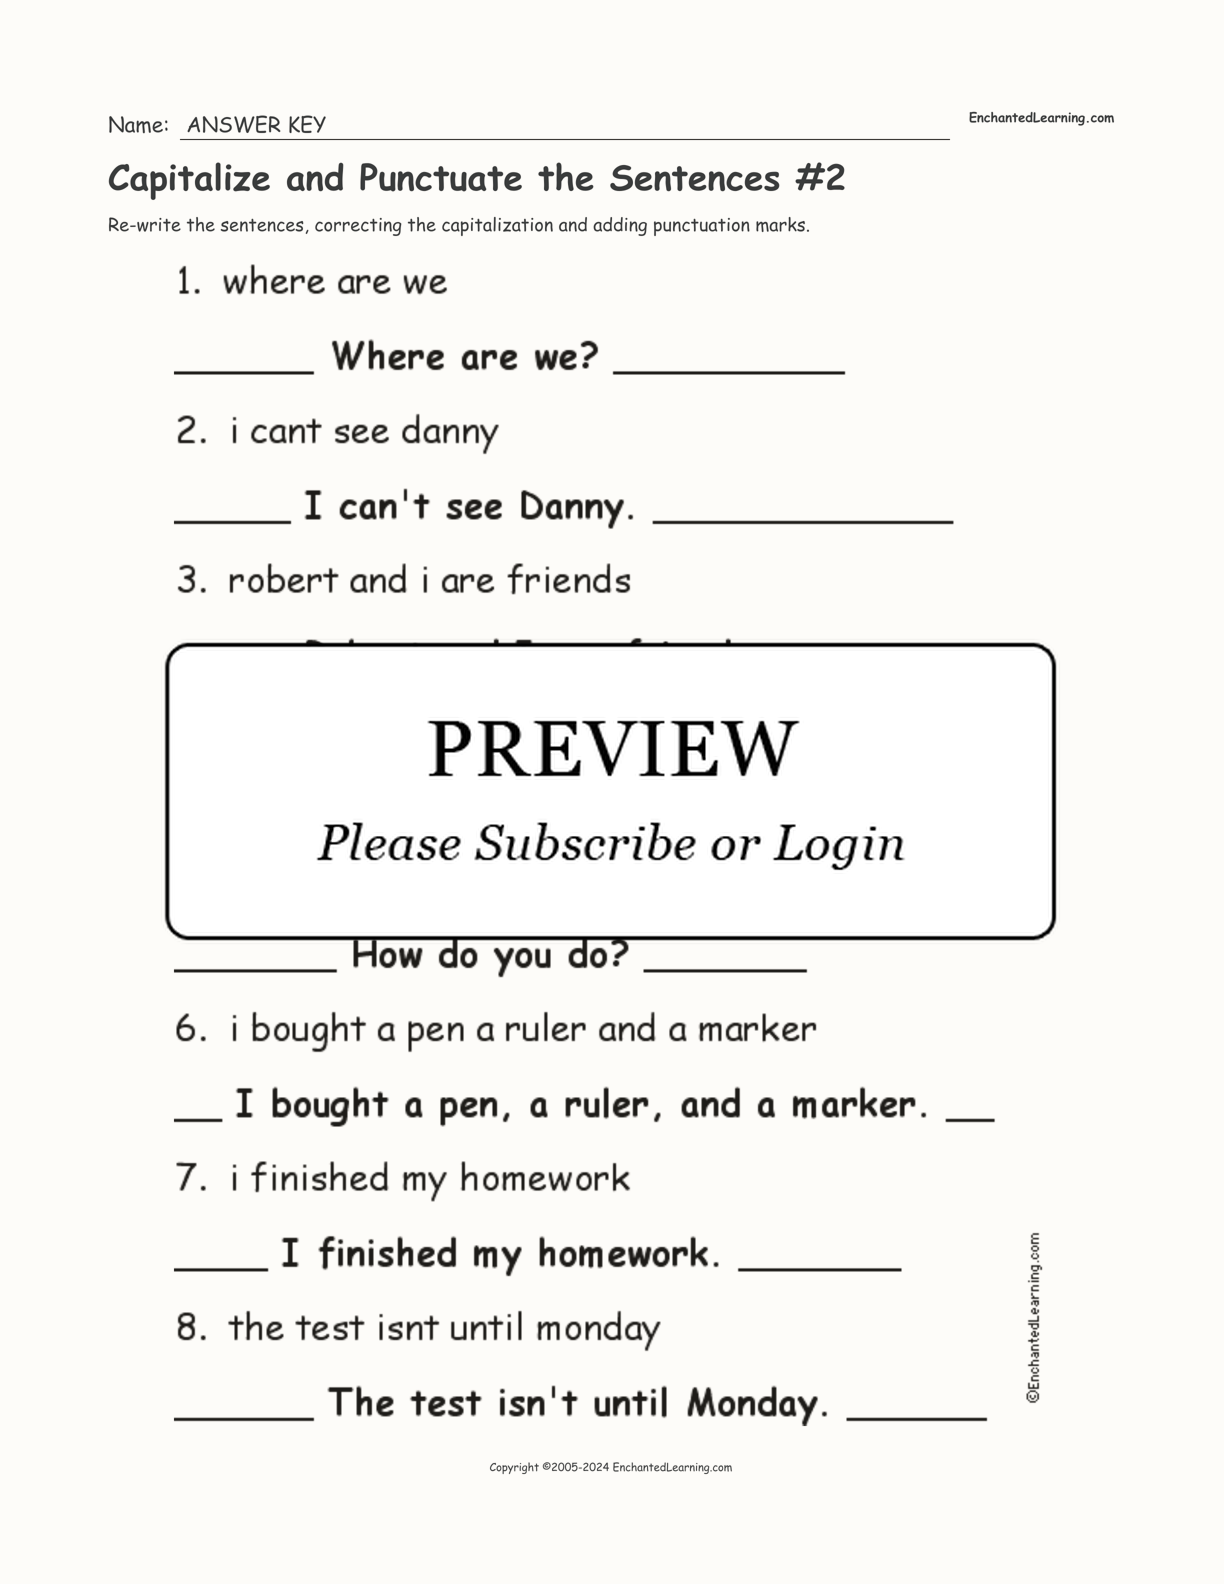 Capitalize and Punctuate the Sentences #2 interactive worksheet page 2